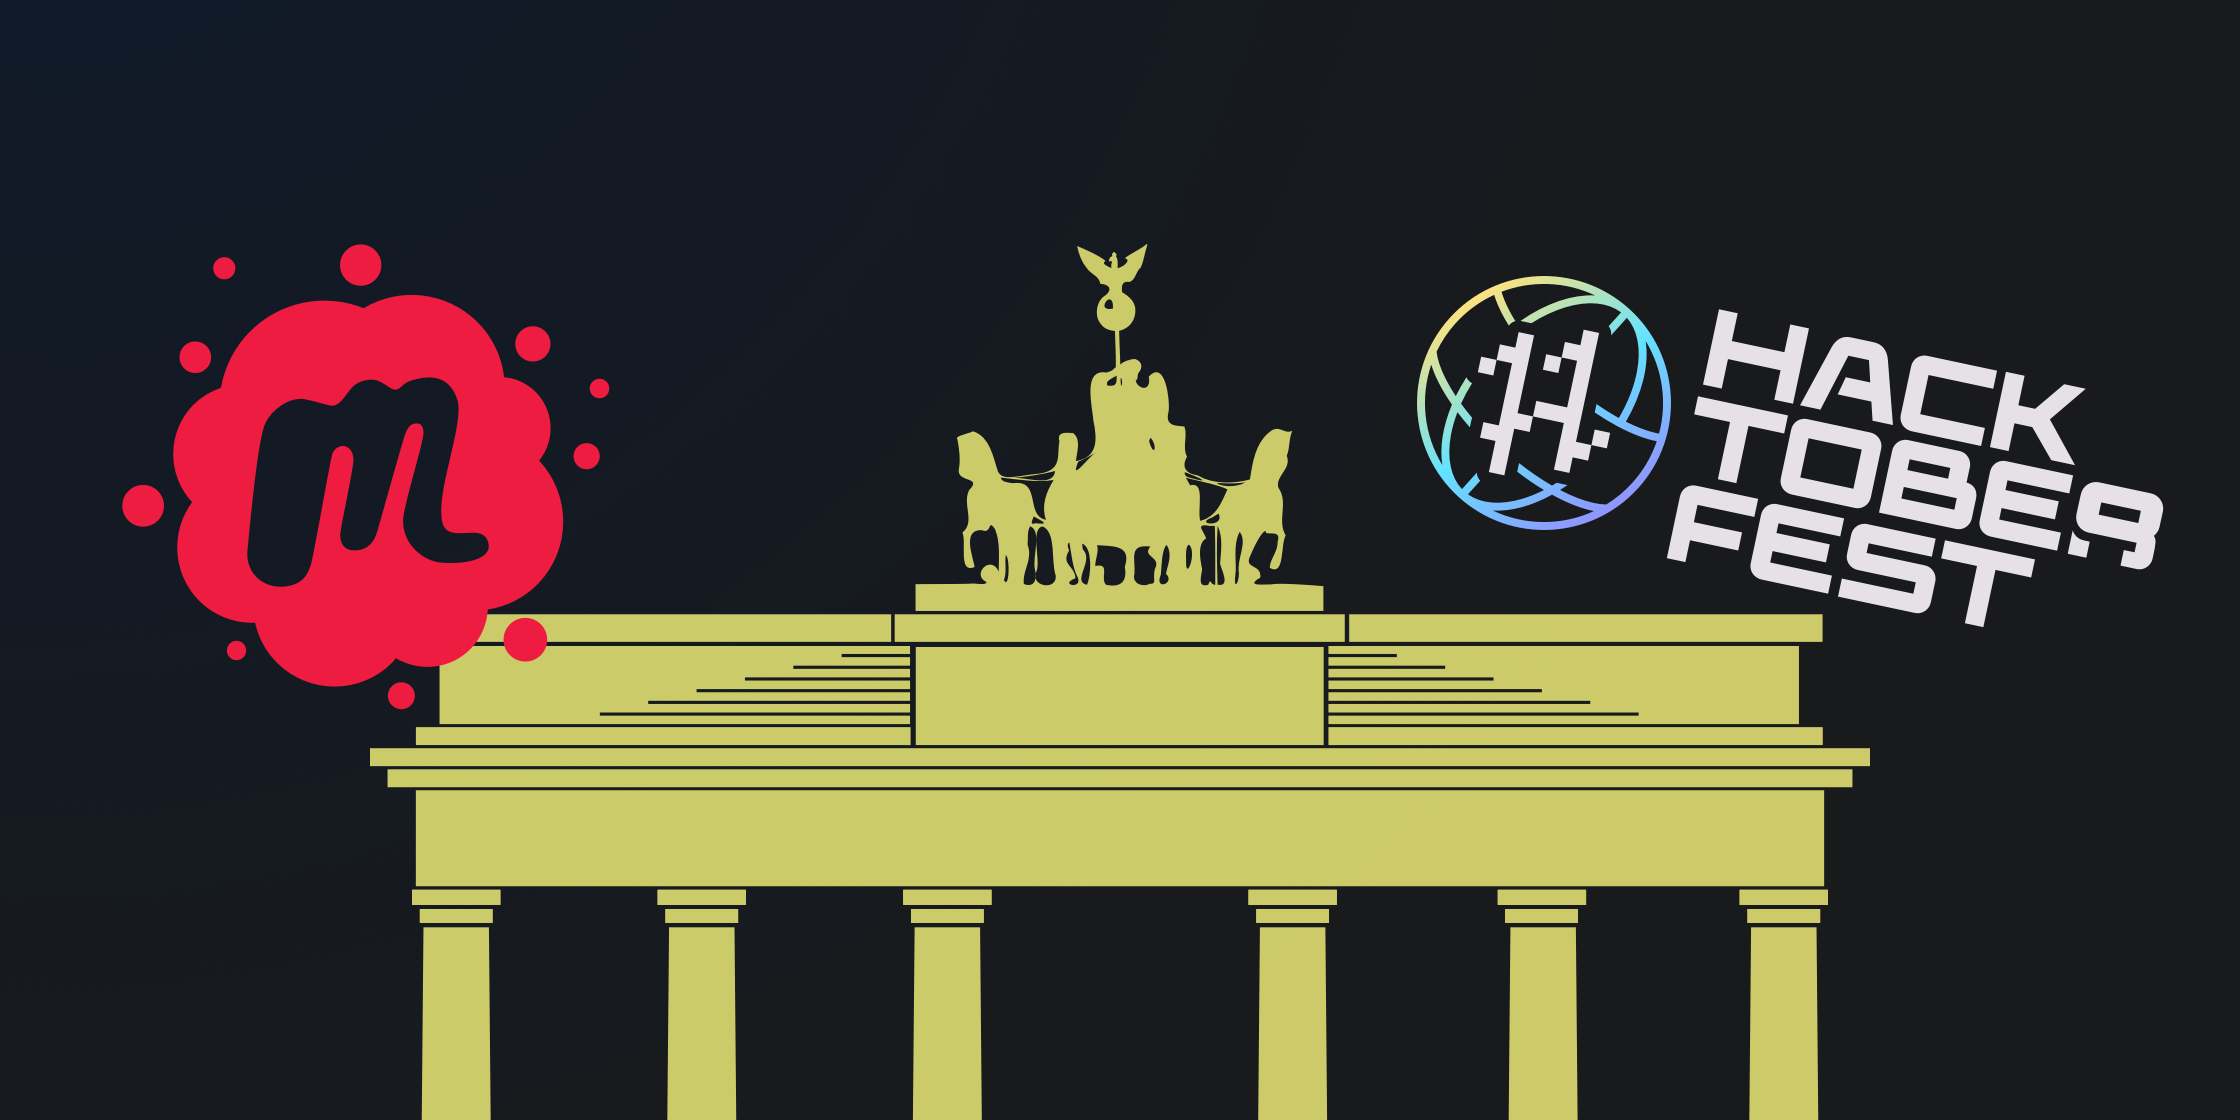 Contribute to Statamic's code or docs during Hacktoberfest, learn about new features we added recently, and read about the first Statamic Meetup in Berlin.